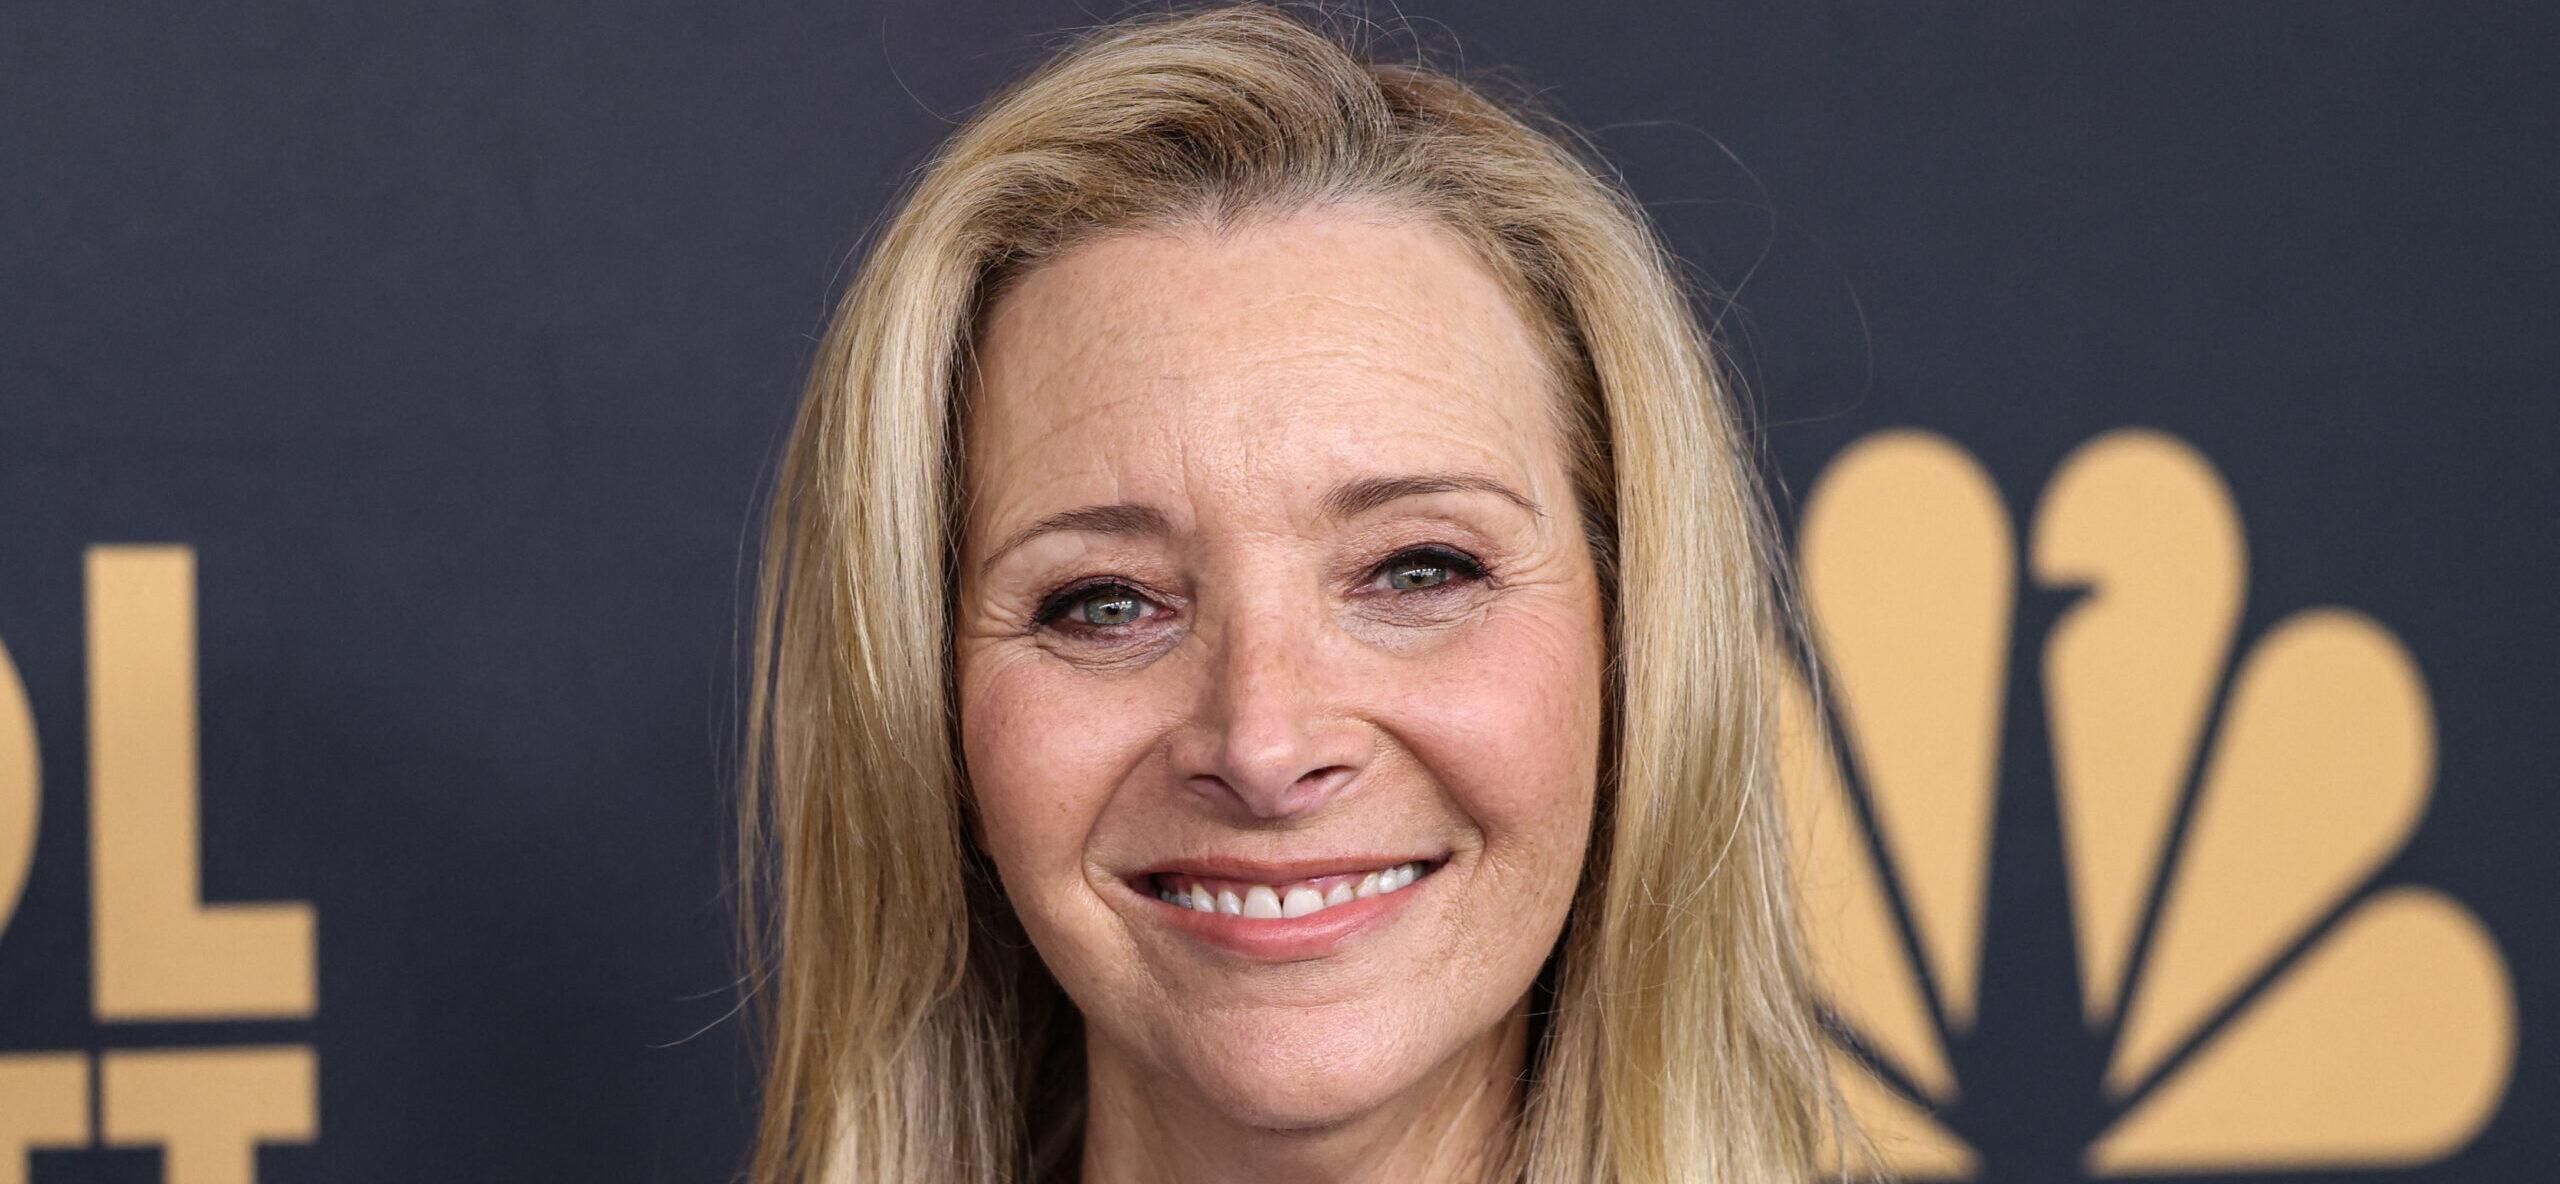 Lisa Kudrow Recalls ‘Bad Behavior’ On ‘Friends’: ‘Now You’re F—able’